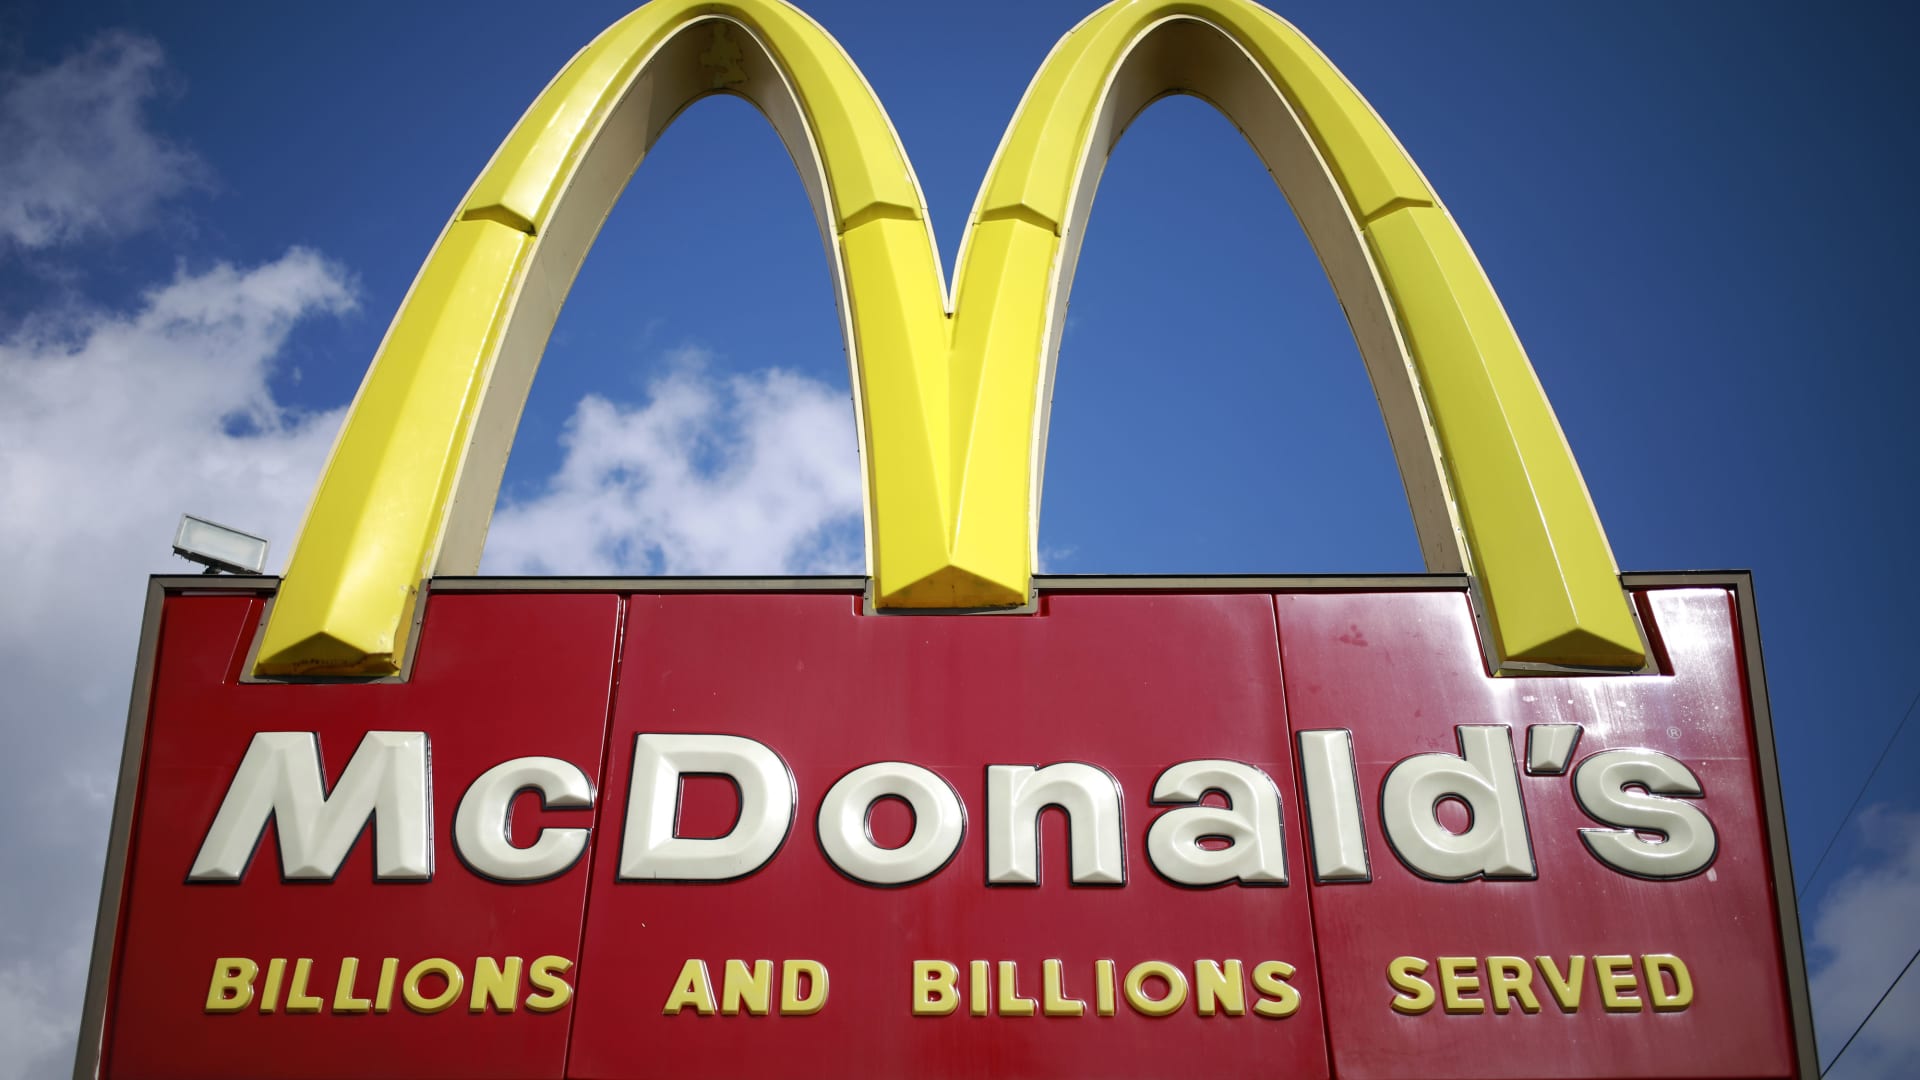 McDonald’s franchisees fined after 305 minors, including 10-year-olds, found working illegally